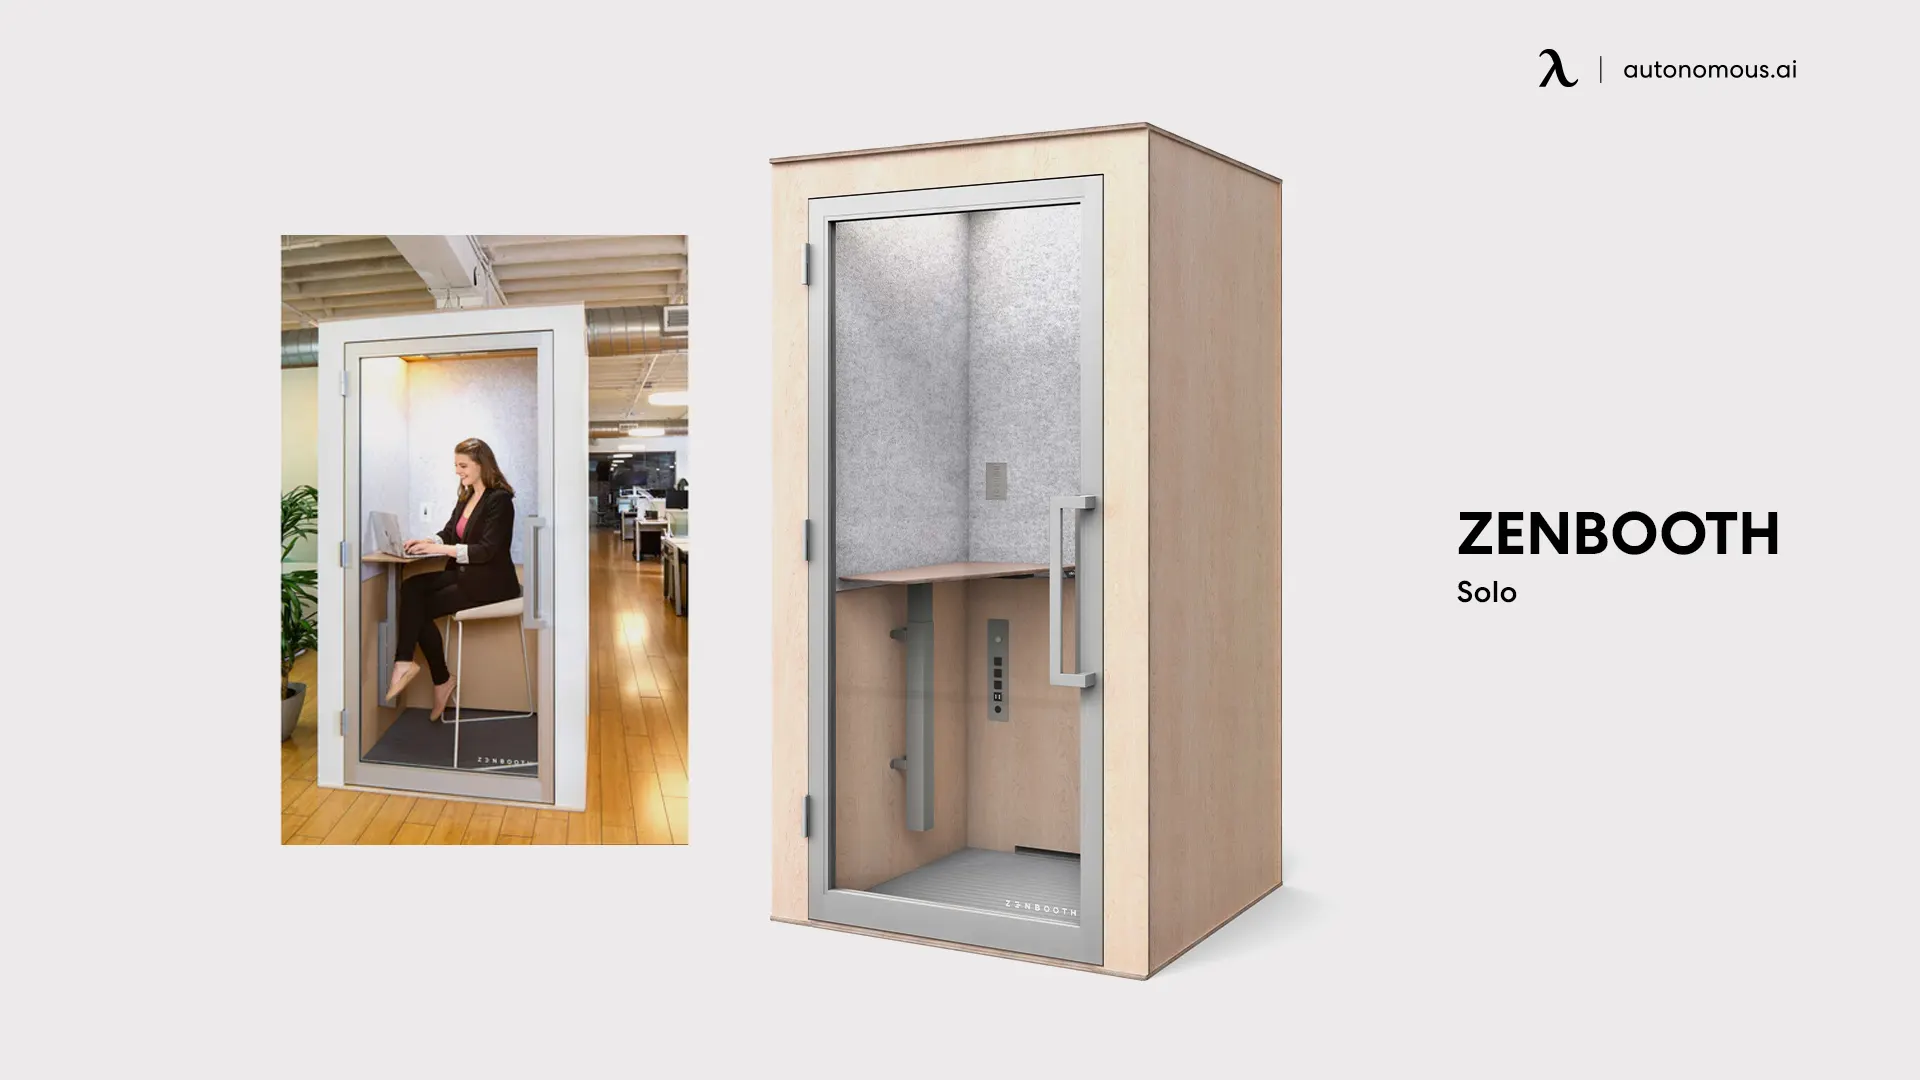 ZenBooth Solo workplace nap pods